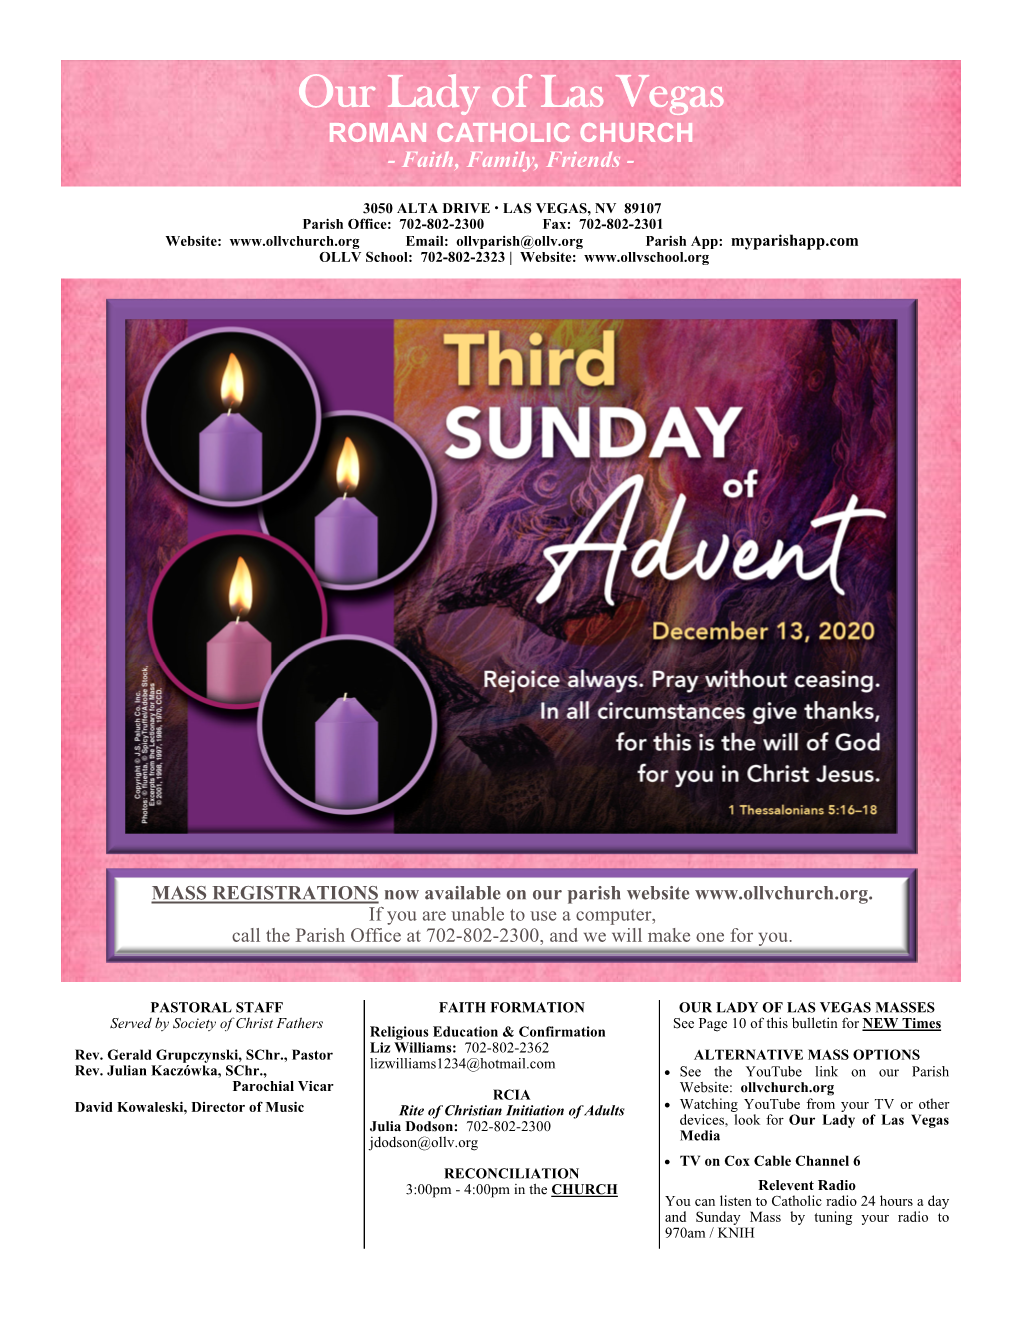 DECEMBER 13, 2020 - Class Third Sunday of Advent Watch “Lukas Storyteller: the True Meaning of Christmas” BEFORE Jan